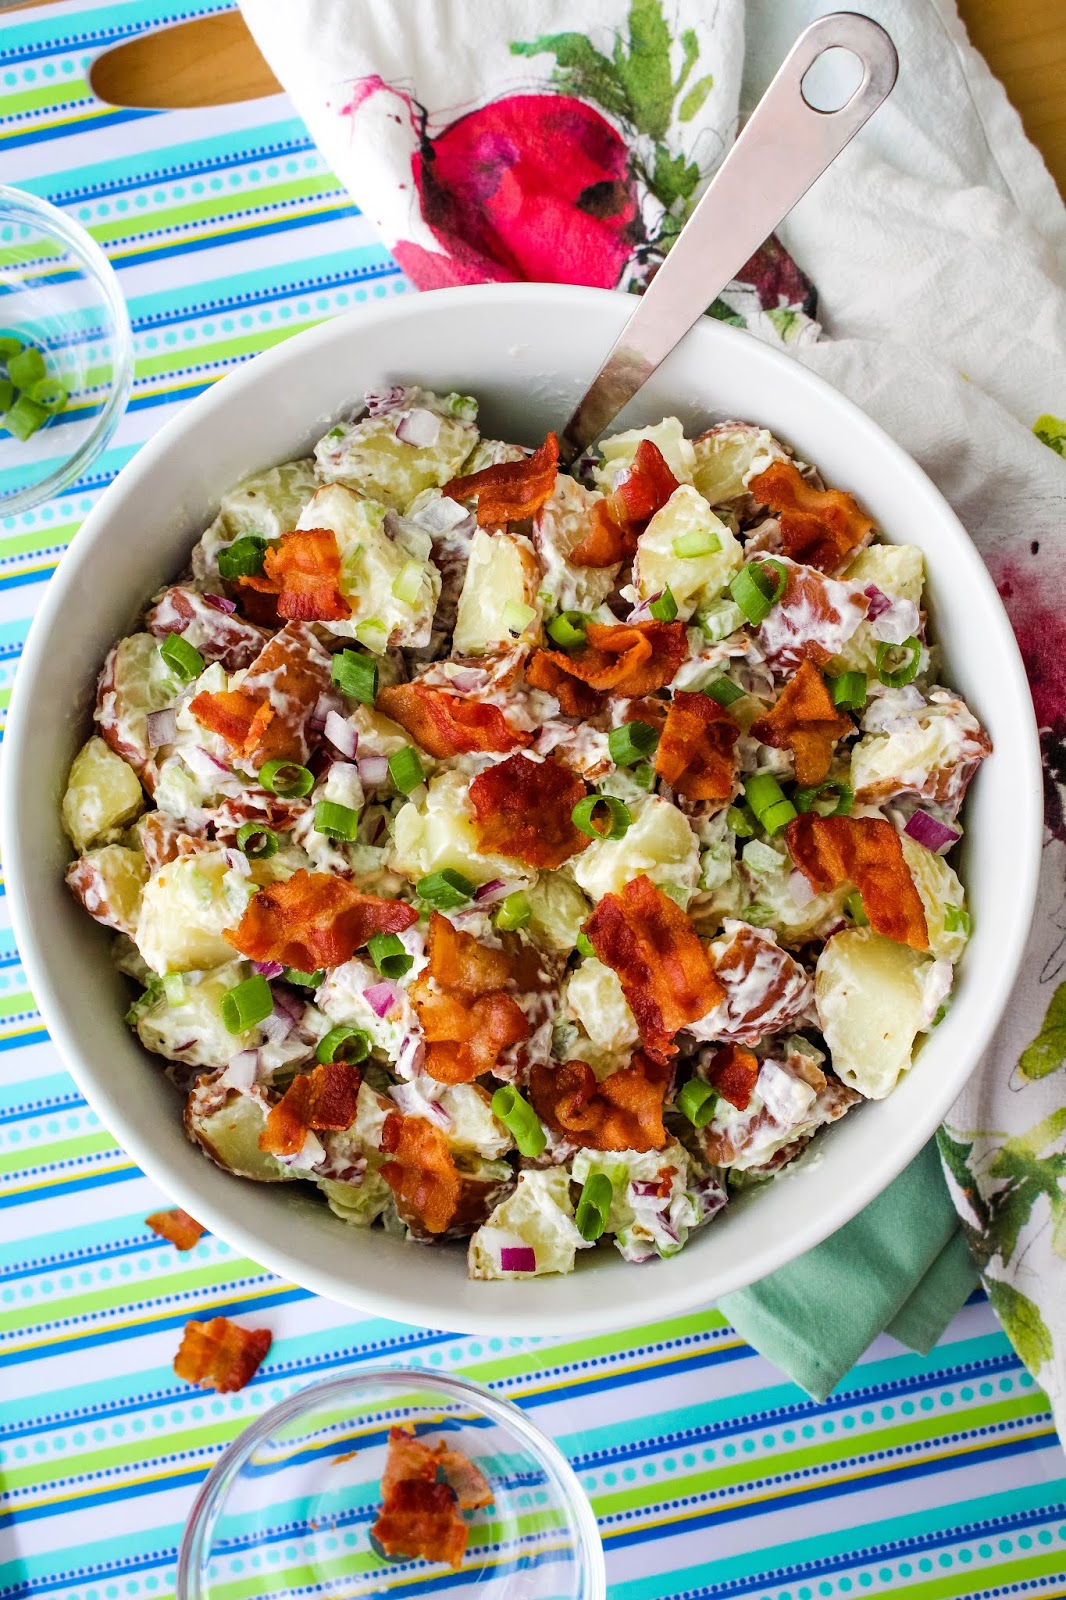 Red Potato Salad with Bacon is made with a cool and creamy mayo-sour cream mixture and tons of crumbled bacon. This simple side dish is perfect for barbecues, parties, and tailgating! #potatosalad #sidedish #bacon